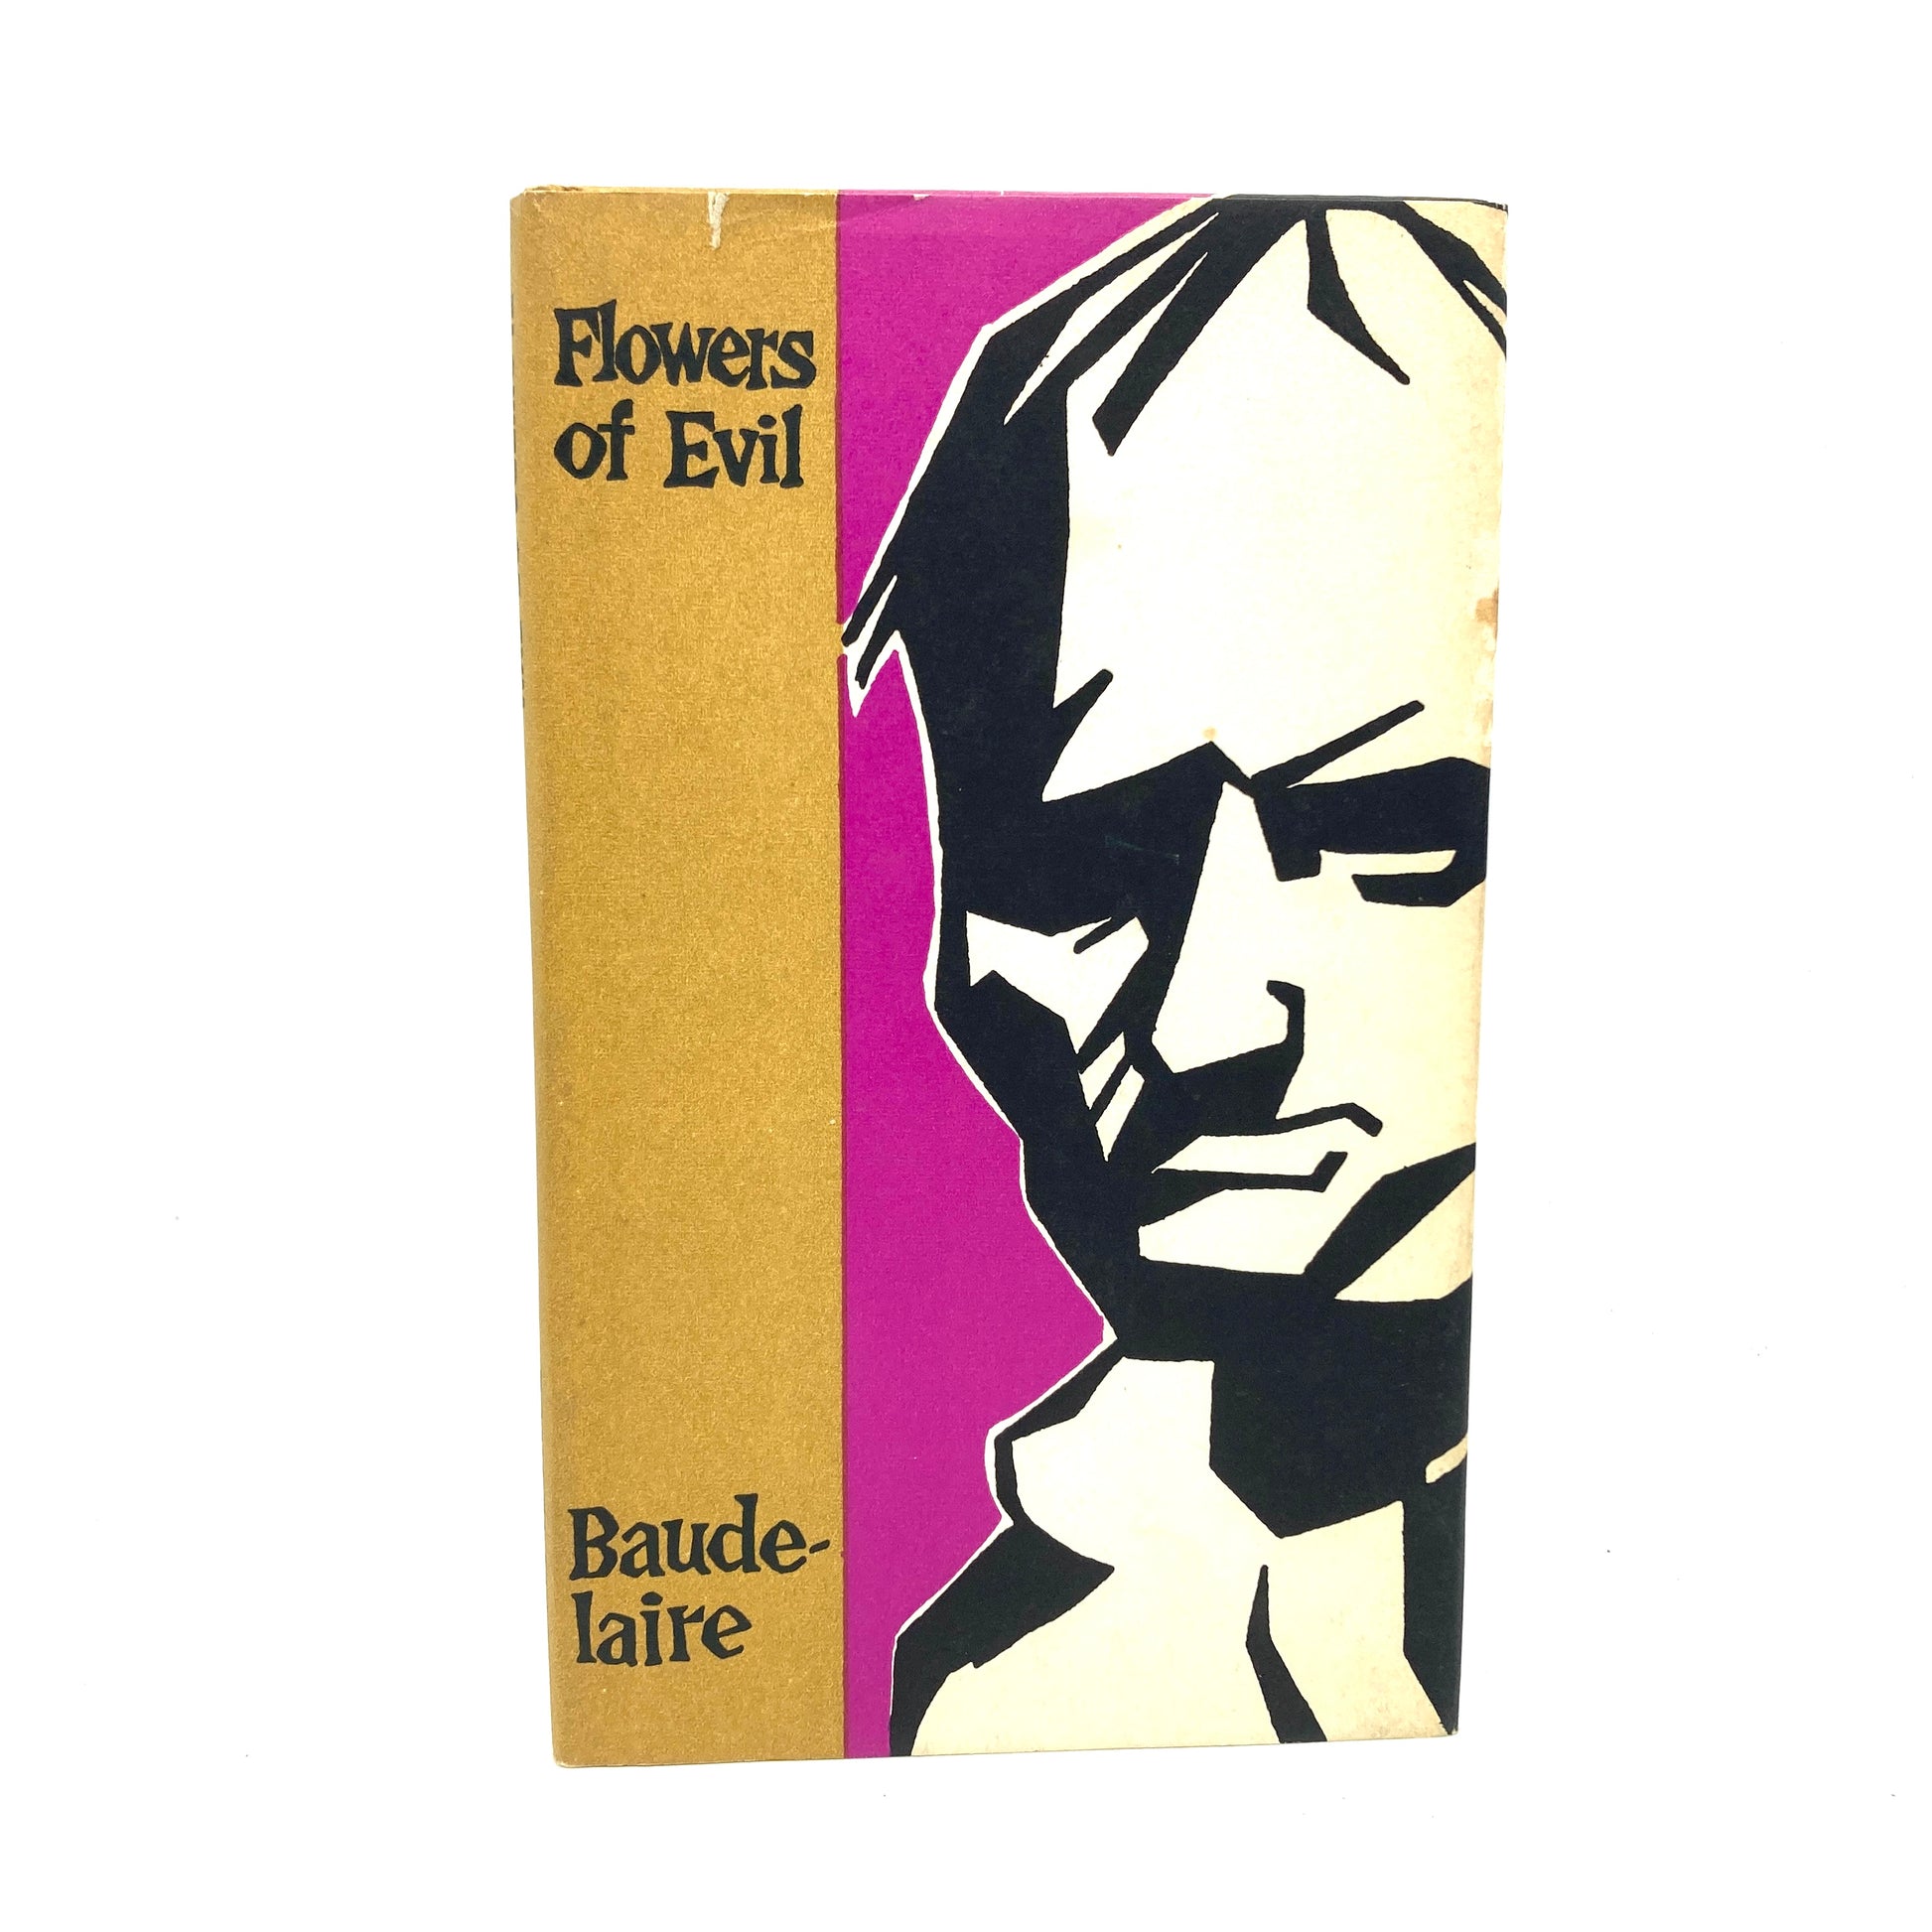 BAUDELAIRE, Charles "Flowers of Evil" [Peter Pauper Press, 1958] - Buzz Bookstore